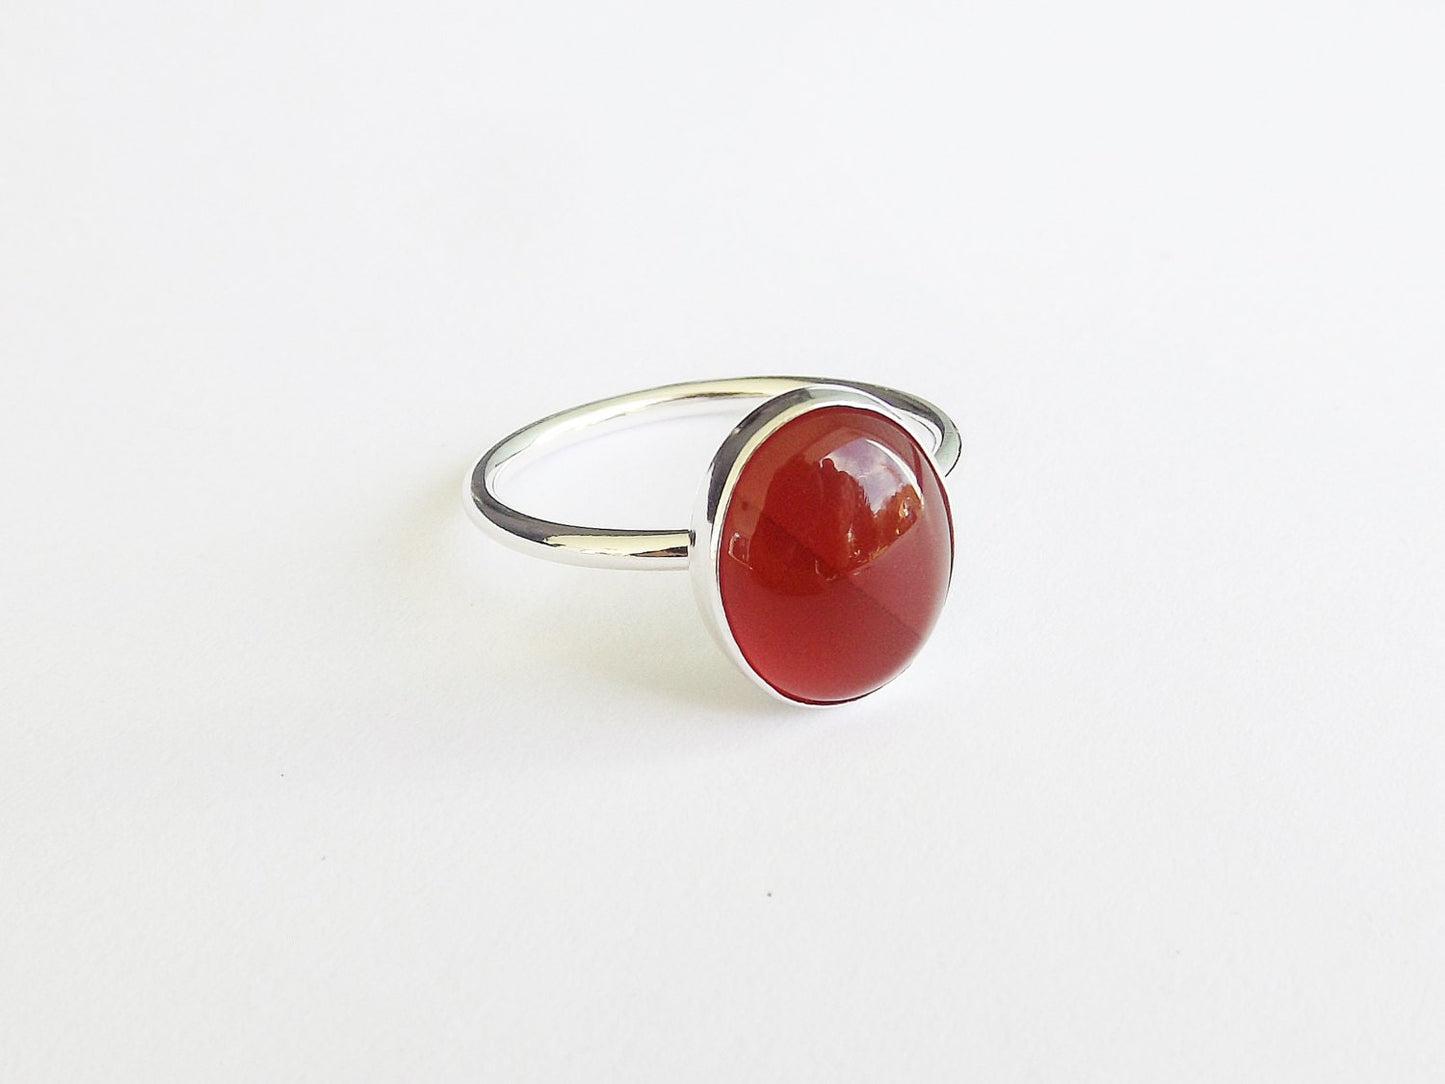 Carnelian Ring, Gemstone Ring, Large Carnelian Ring, Red, Modern, Simple, Everyday, Gift, Gemstone Jewelry, Natural Stone, Cocktail Ring